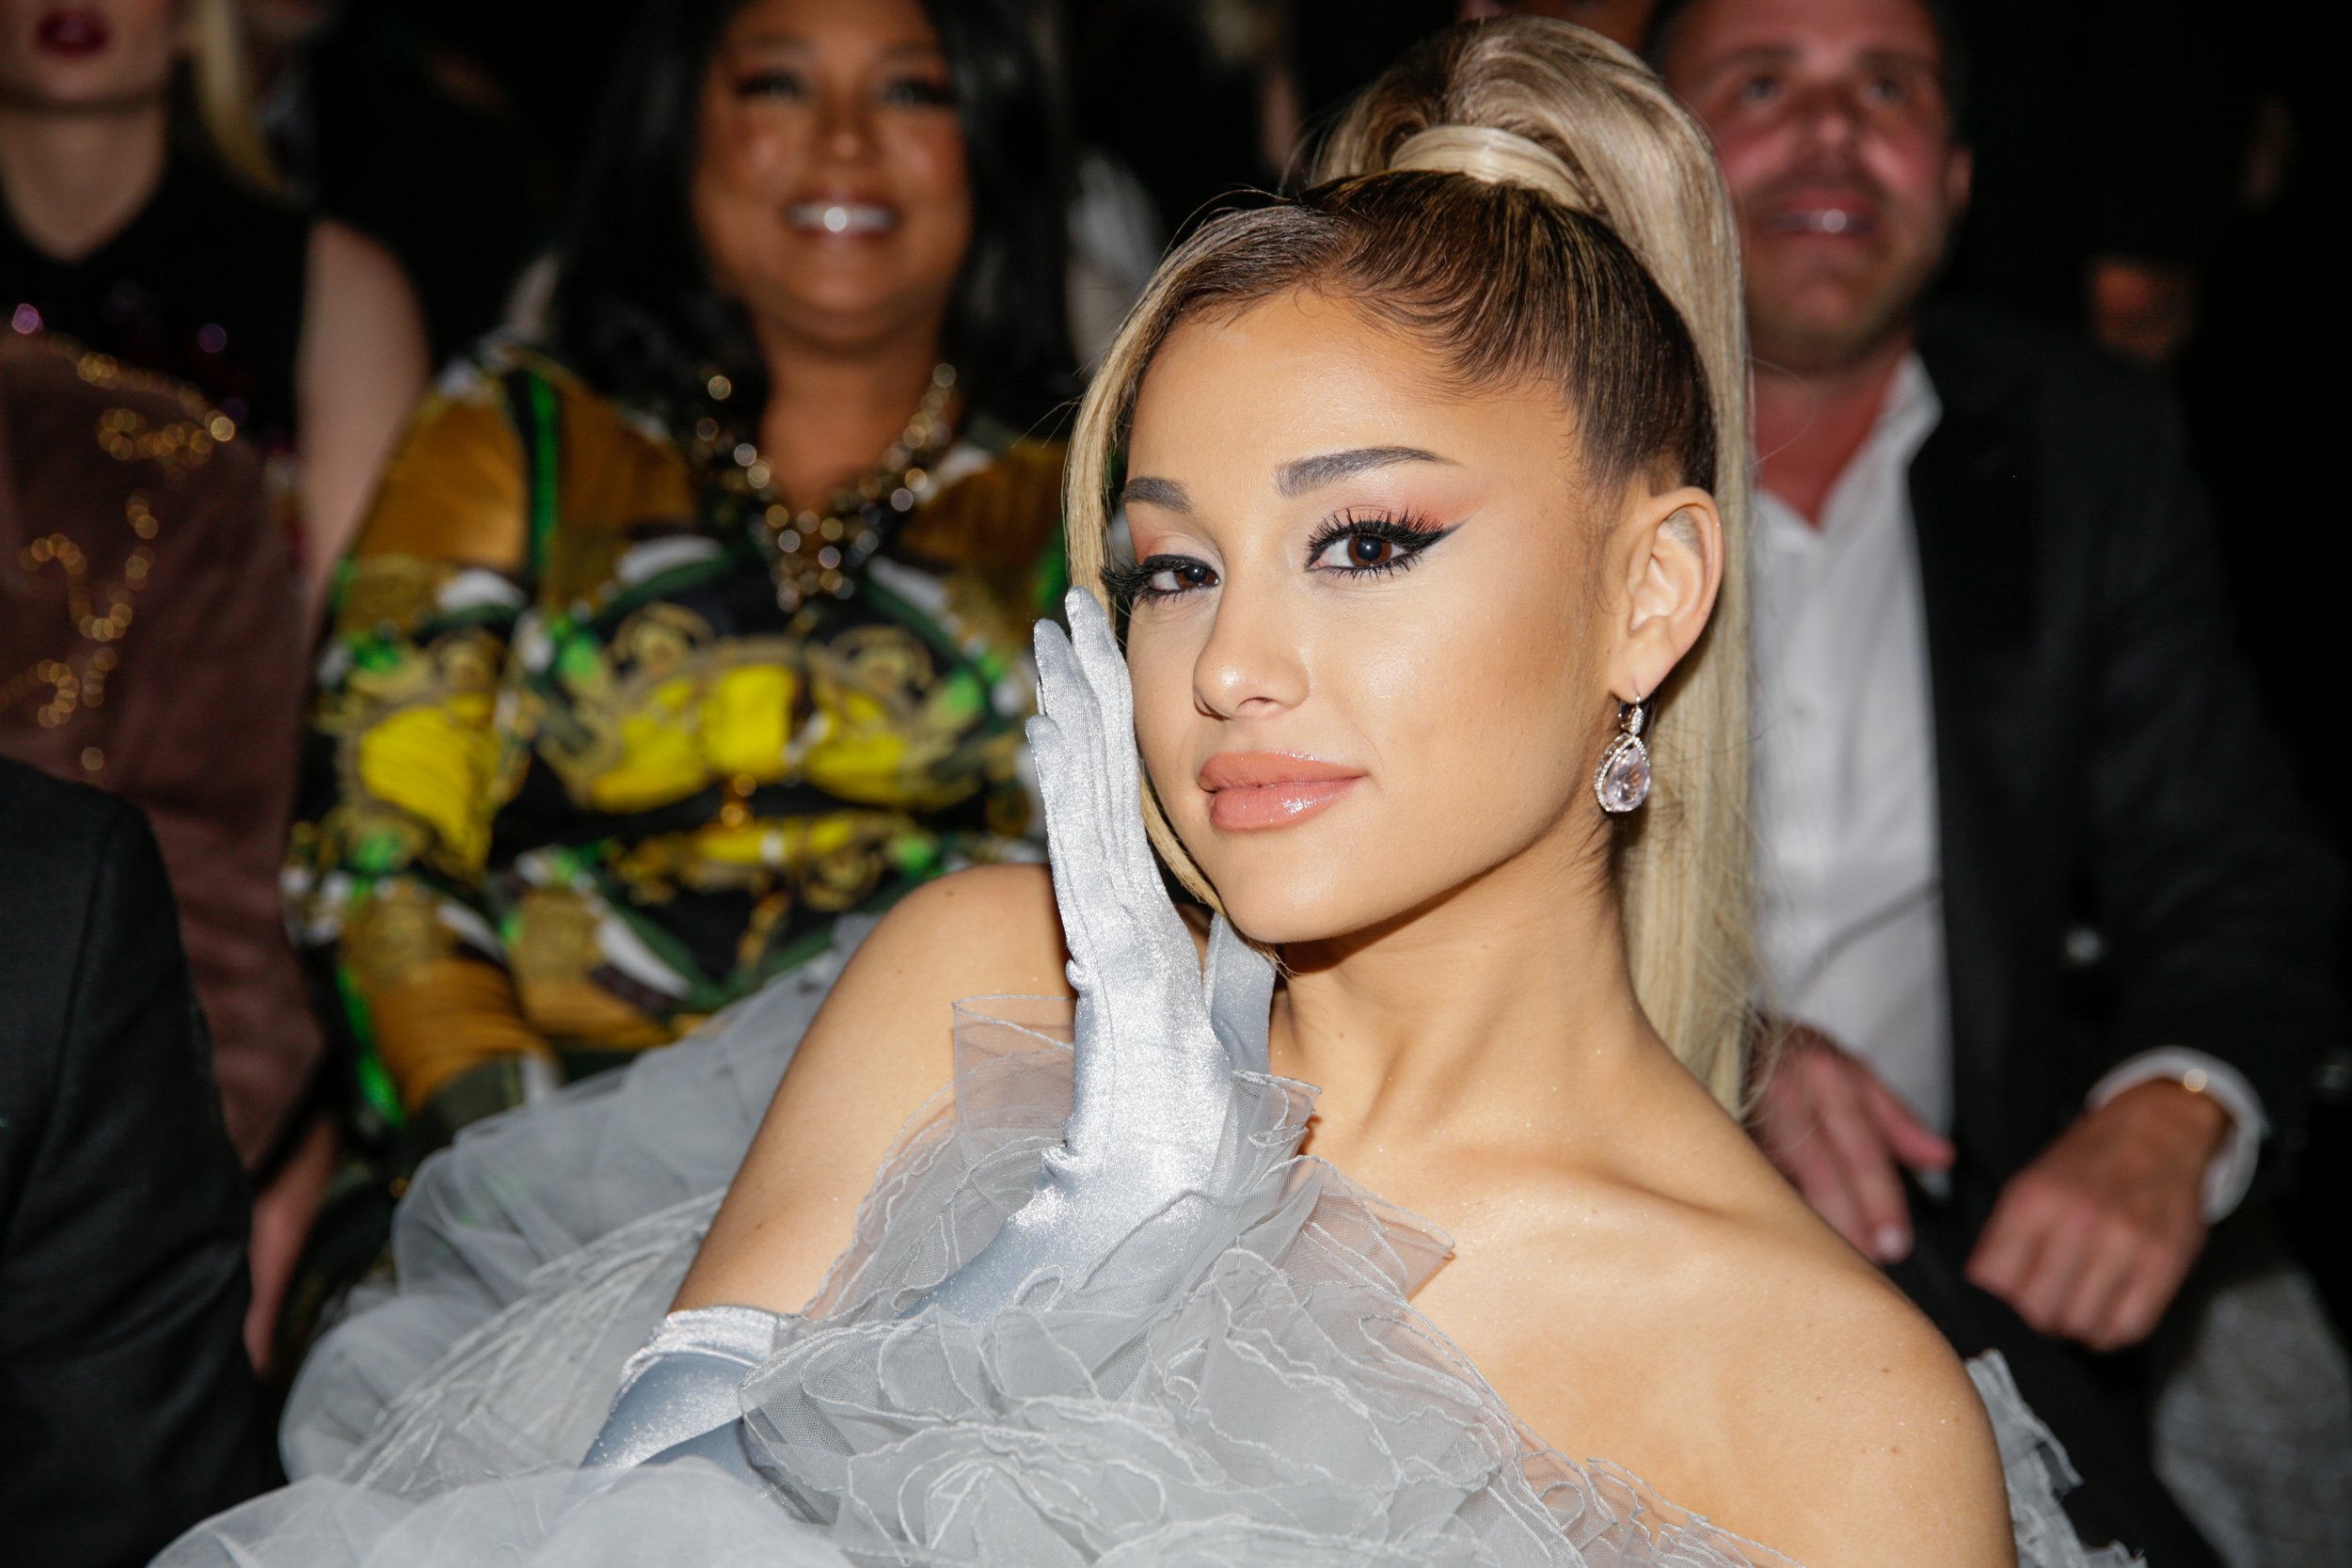 The Voice host Ariana Grande wears a silver dress and silver gloves.